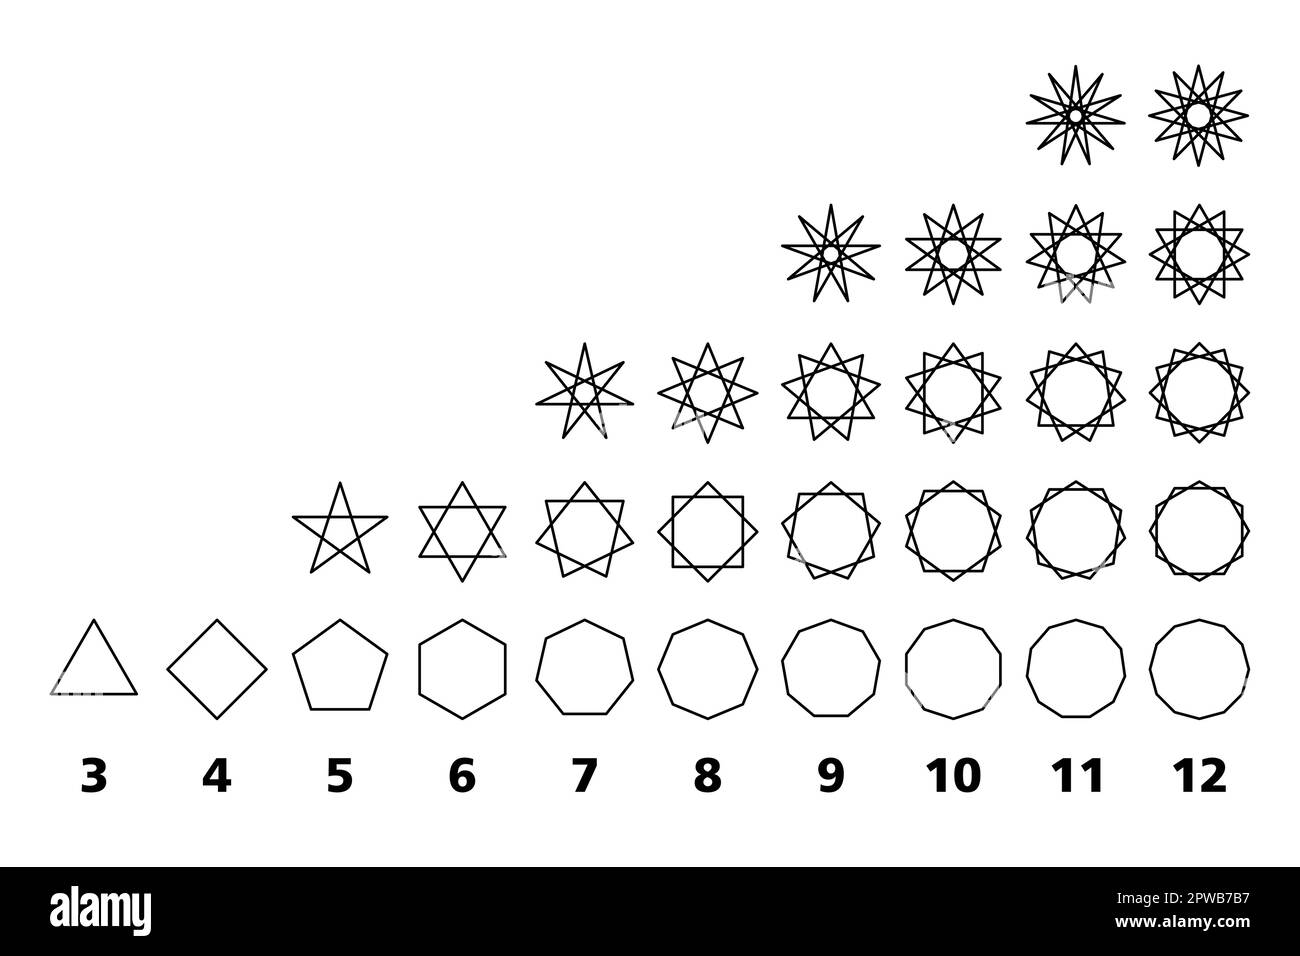 Regular polygons and their geometric star figures, from 3 to 12 points Stock Vector